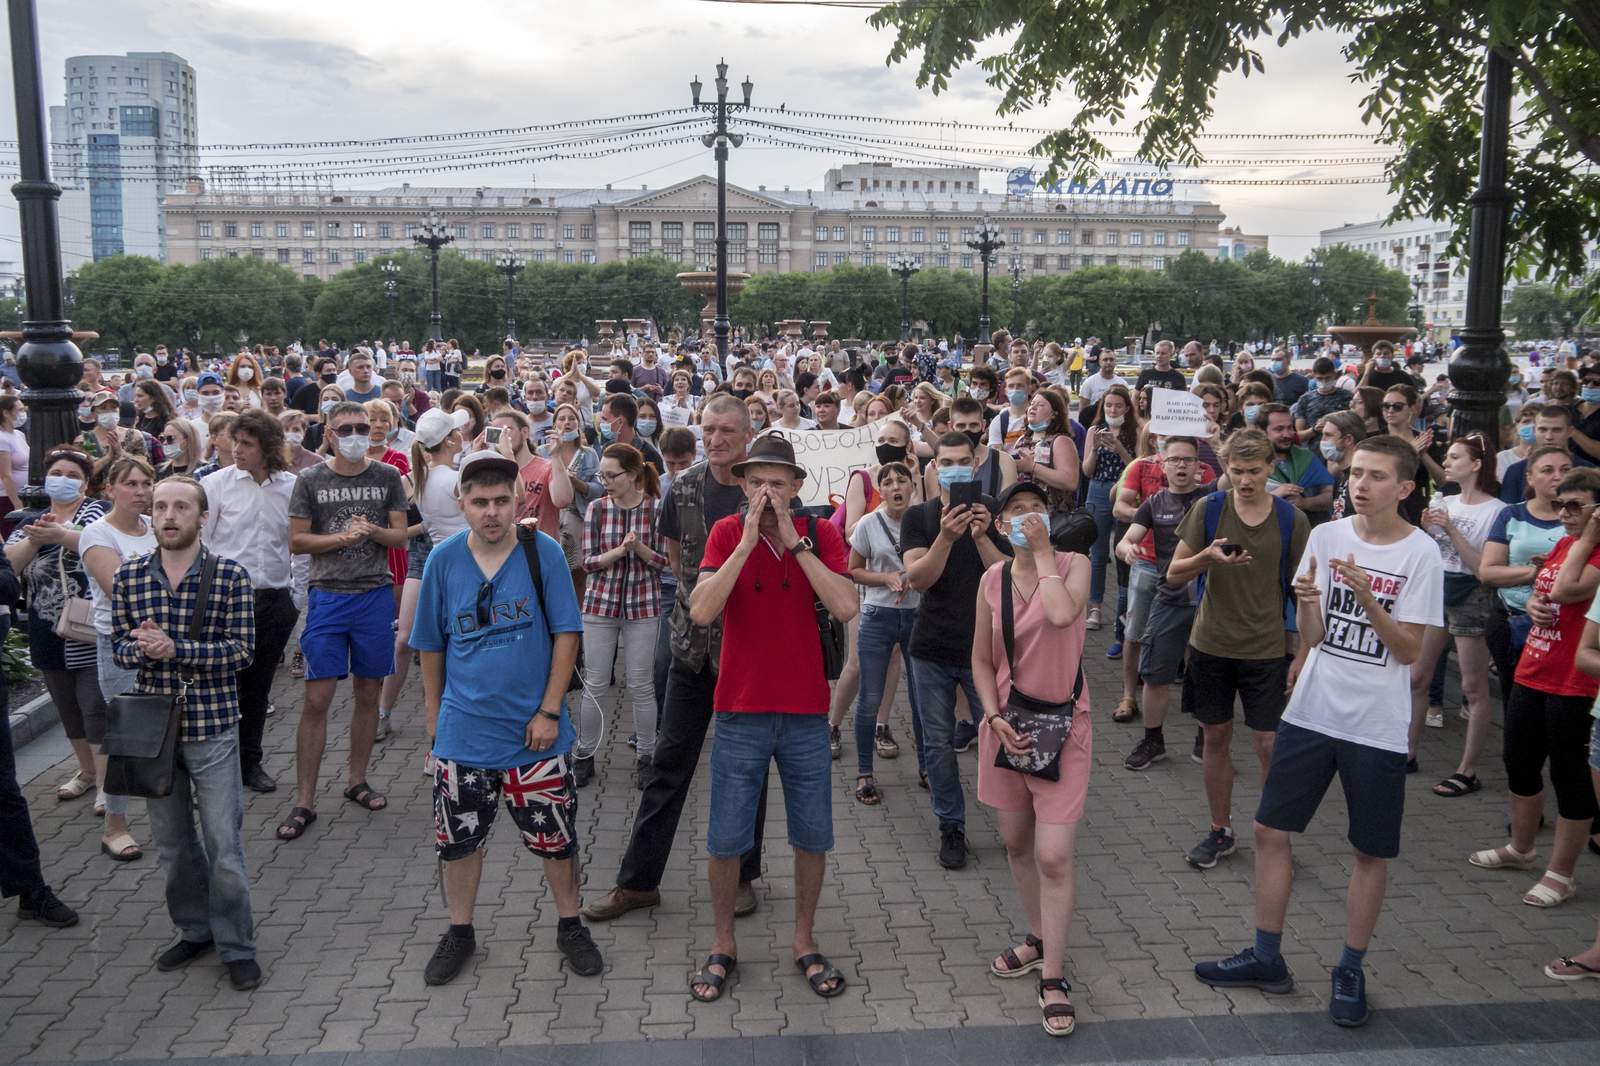 Thousands in Russia's Far East protest governor's jailing